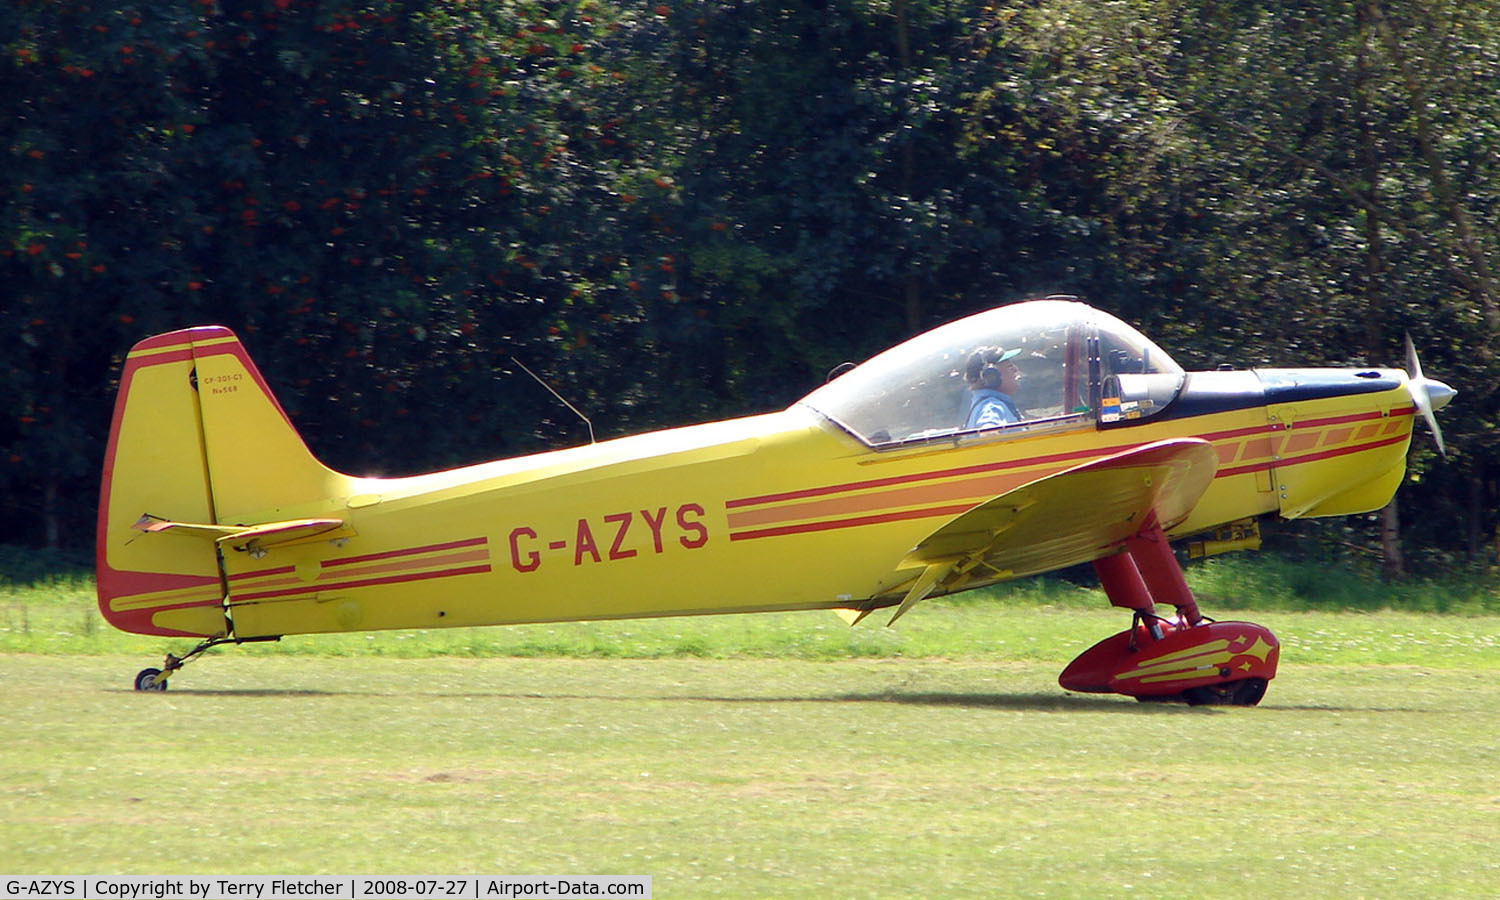 G-AZYS, 1961 Scintex CP-301C-1 Emeraude C/N 568, Scintex CP301-C1 - a visitor to Baxterley Wings and Wheels 2008 , a grass strip in rural Warwickshire in the UK